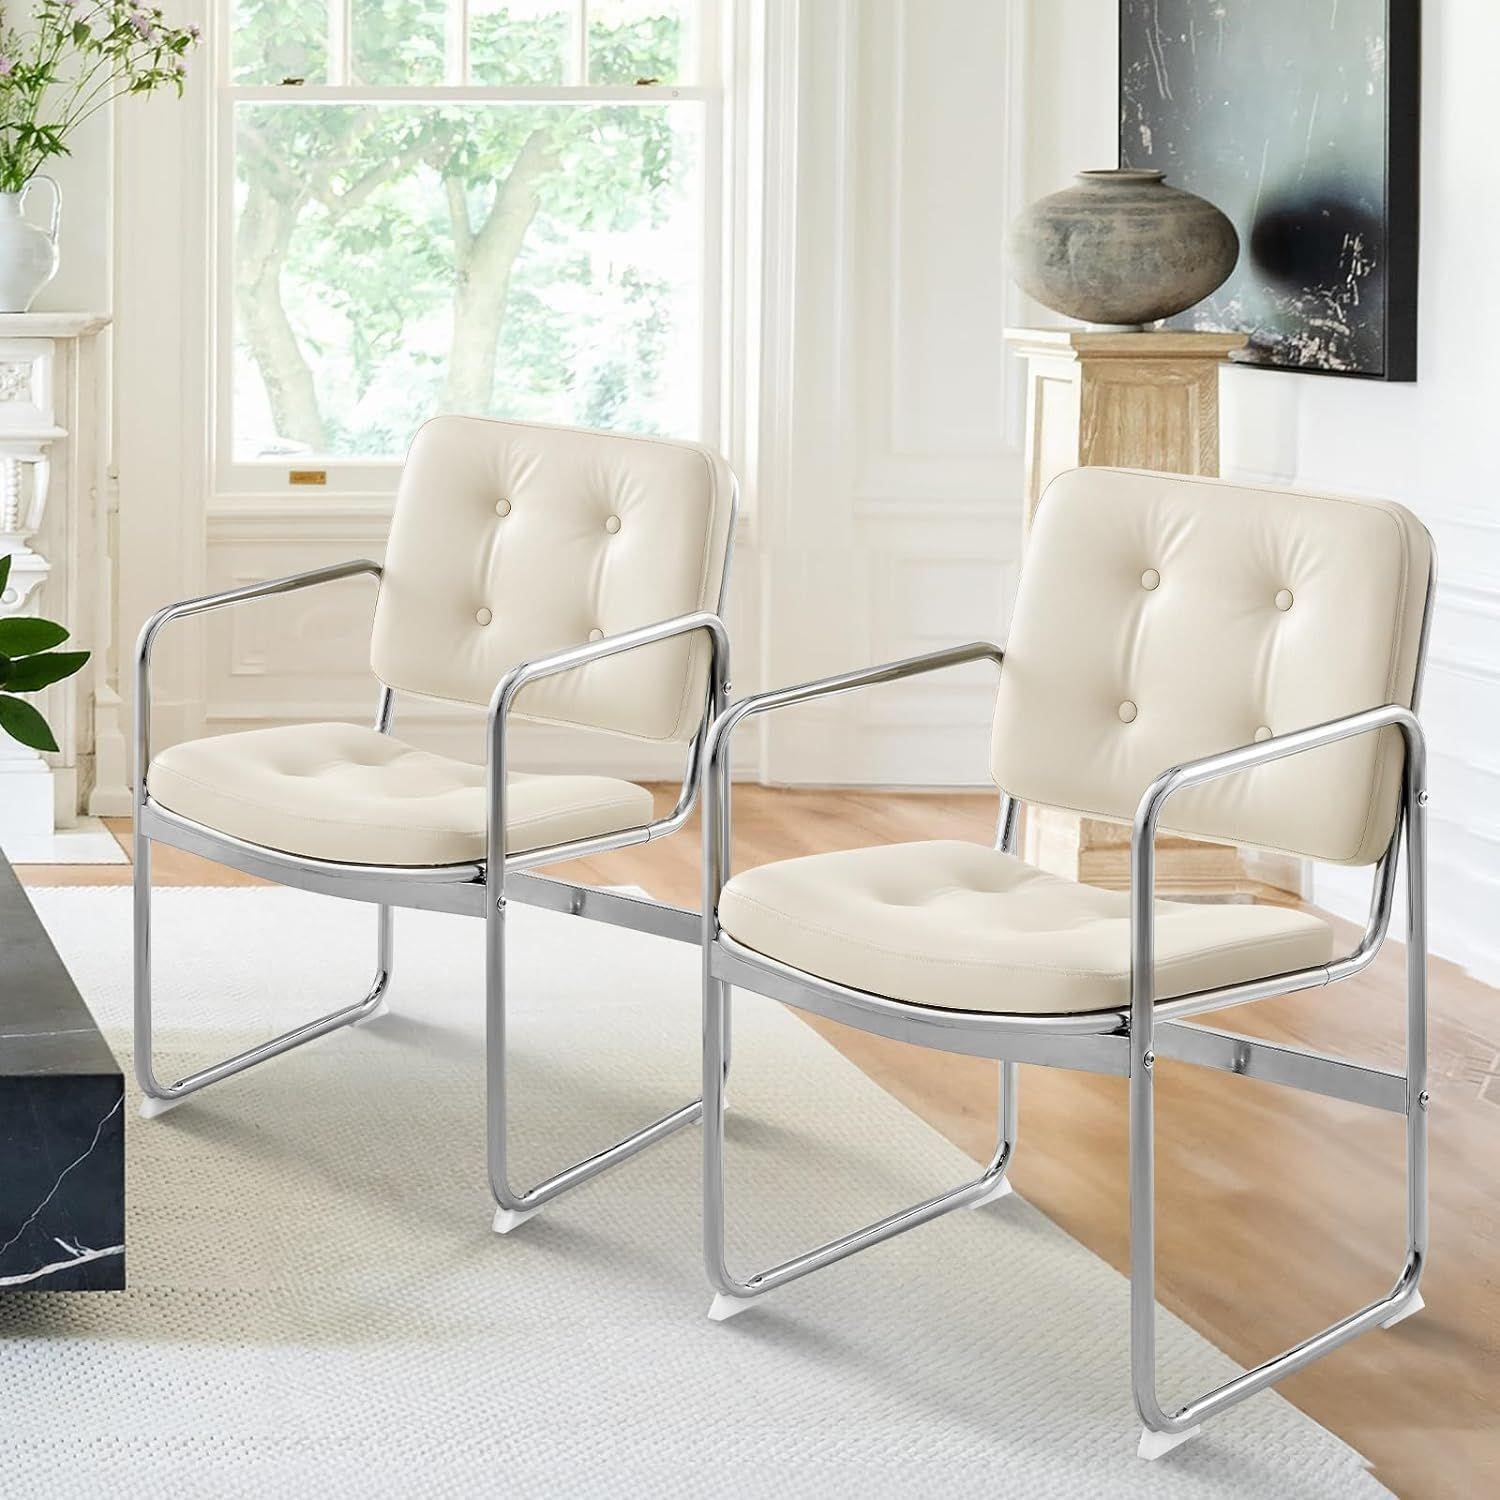 SETOF 2 COLAMY Modern Dining Chairs, Tufted Beige